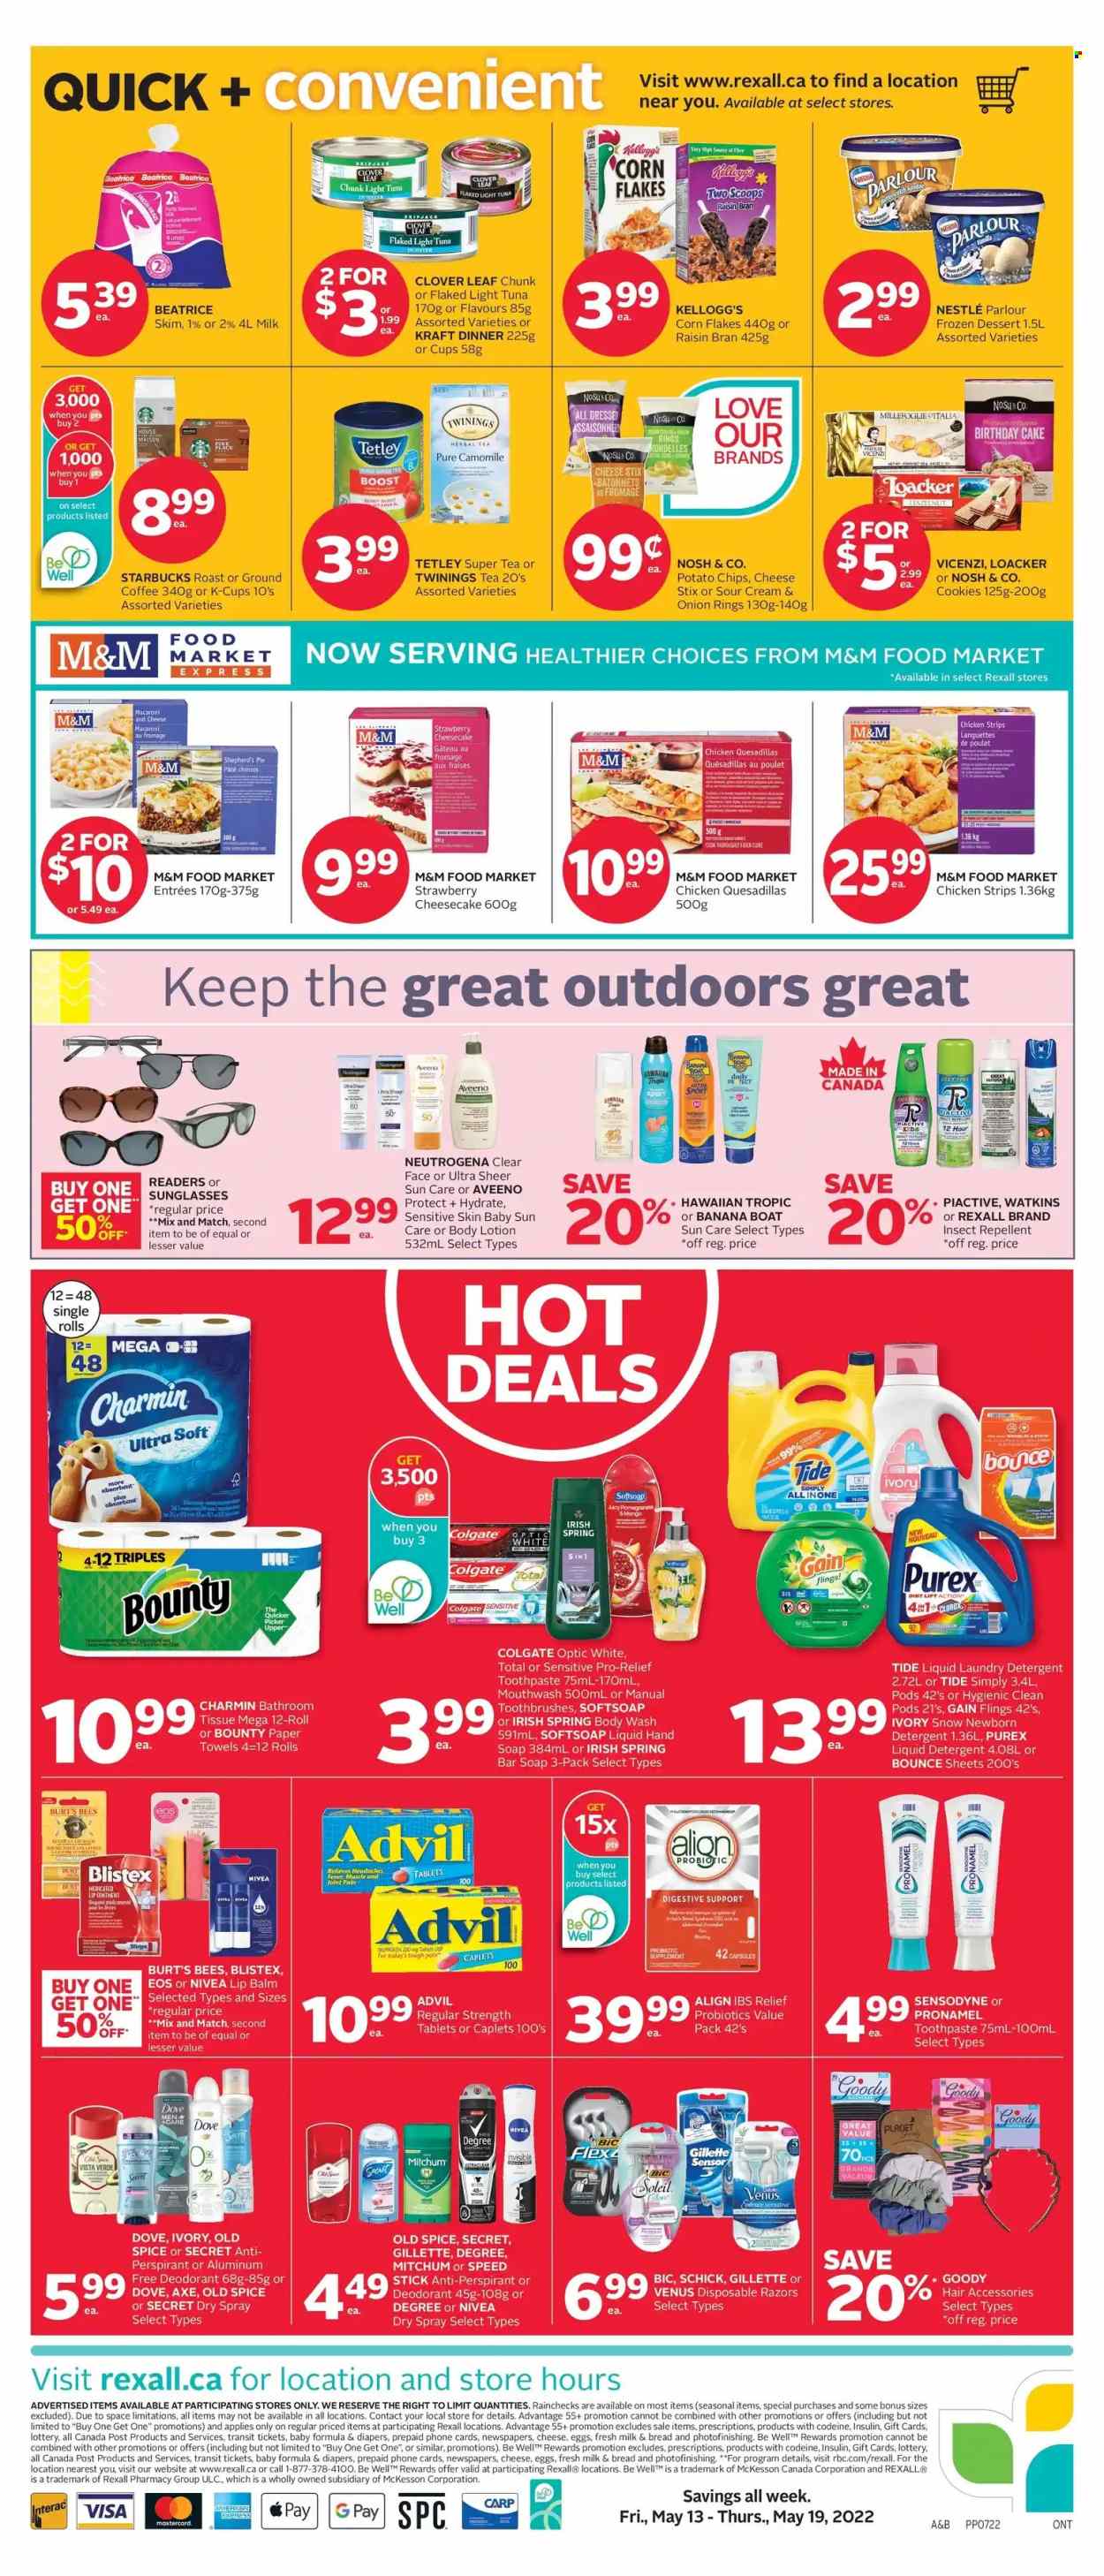 thumbnail - Rexall Flyer - May 13, 2022 - May 19, 2022 - Sales products - cookies, cake, Bounty, Kellogg's, Digestive, potato chips, onion rings, mango, tuna, tuna in water, light tuna, corn flakes, Raisin Bran, spice, Kraft®, Clover, Boost, green tea, tea, herbal tea, Twinings, coffee, ground coffee, coffee capsules, Starbucks, K-Cups, nappies, Aveeno, Nivea, ointment, bath tissue, kitchen towels, paper towels, Charmin, Gain, Tide, liquid detergent, laundry detergent, Bounce, Purex, body wash, Softsoap, hand soap, soap bar, soap, toothpaste, mouthwash, lip balm, body lotion, anti-perspirant, Speed Stick, Axe, BIC, Gillette, Schick, Venus, disposable razor, repellent, probiotics, Advil Rapid, detergent, Dove, Colgate, Nestlé, Neutrogena, Old Spice, Sensodyne, M&M's, deodorant. Page 10.